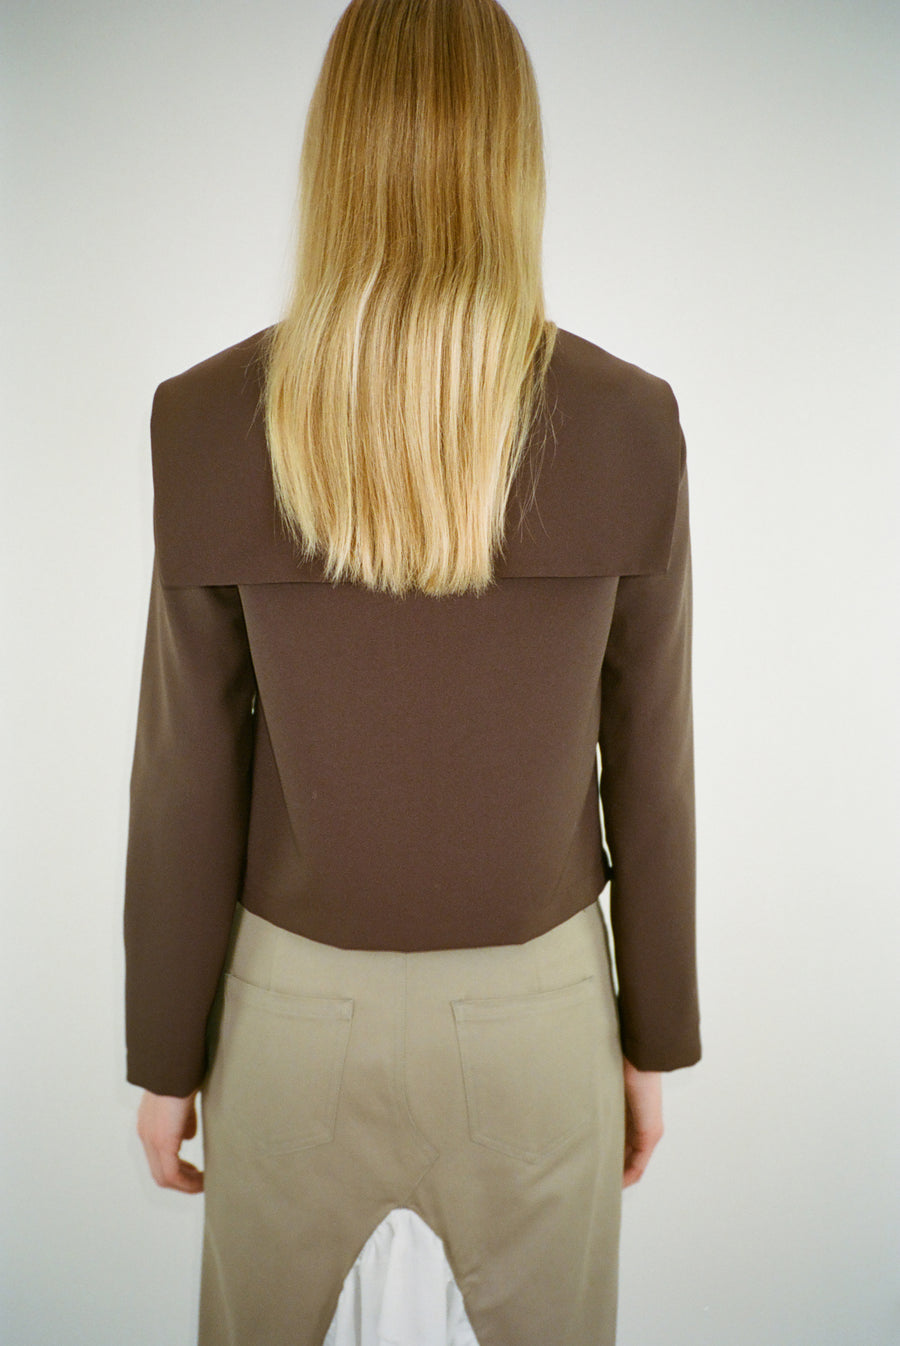 Long sleeve top in brown with sailor color and rose detail at front on model